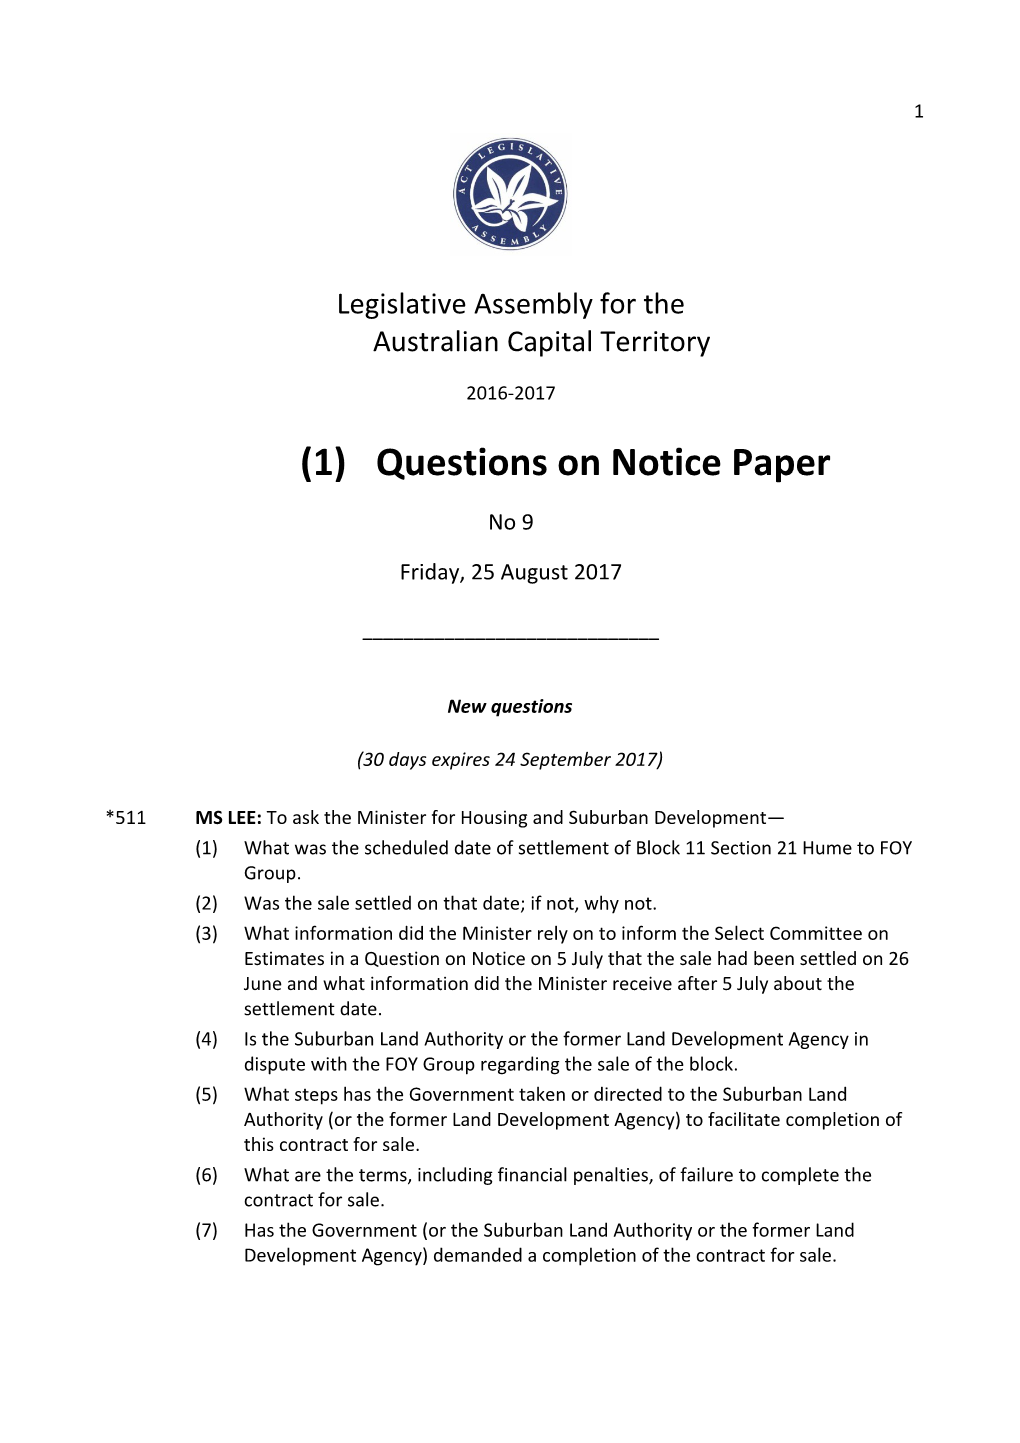 Questions on Notice Paper No 9 Friday 25 August 2017